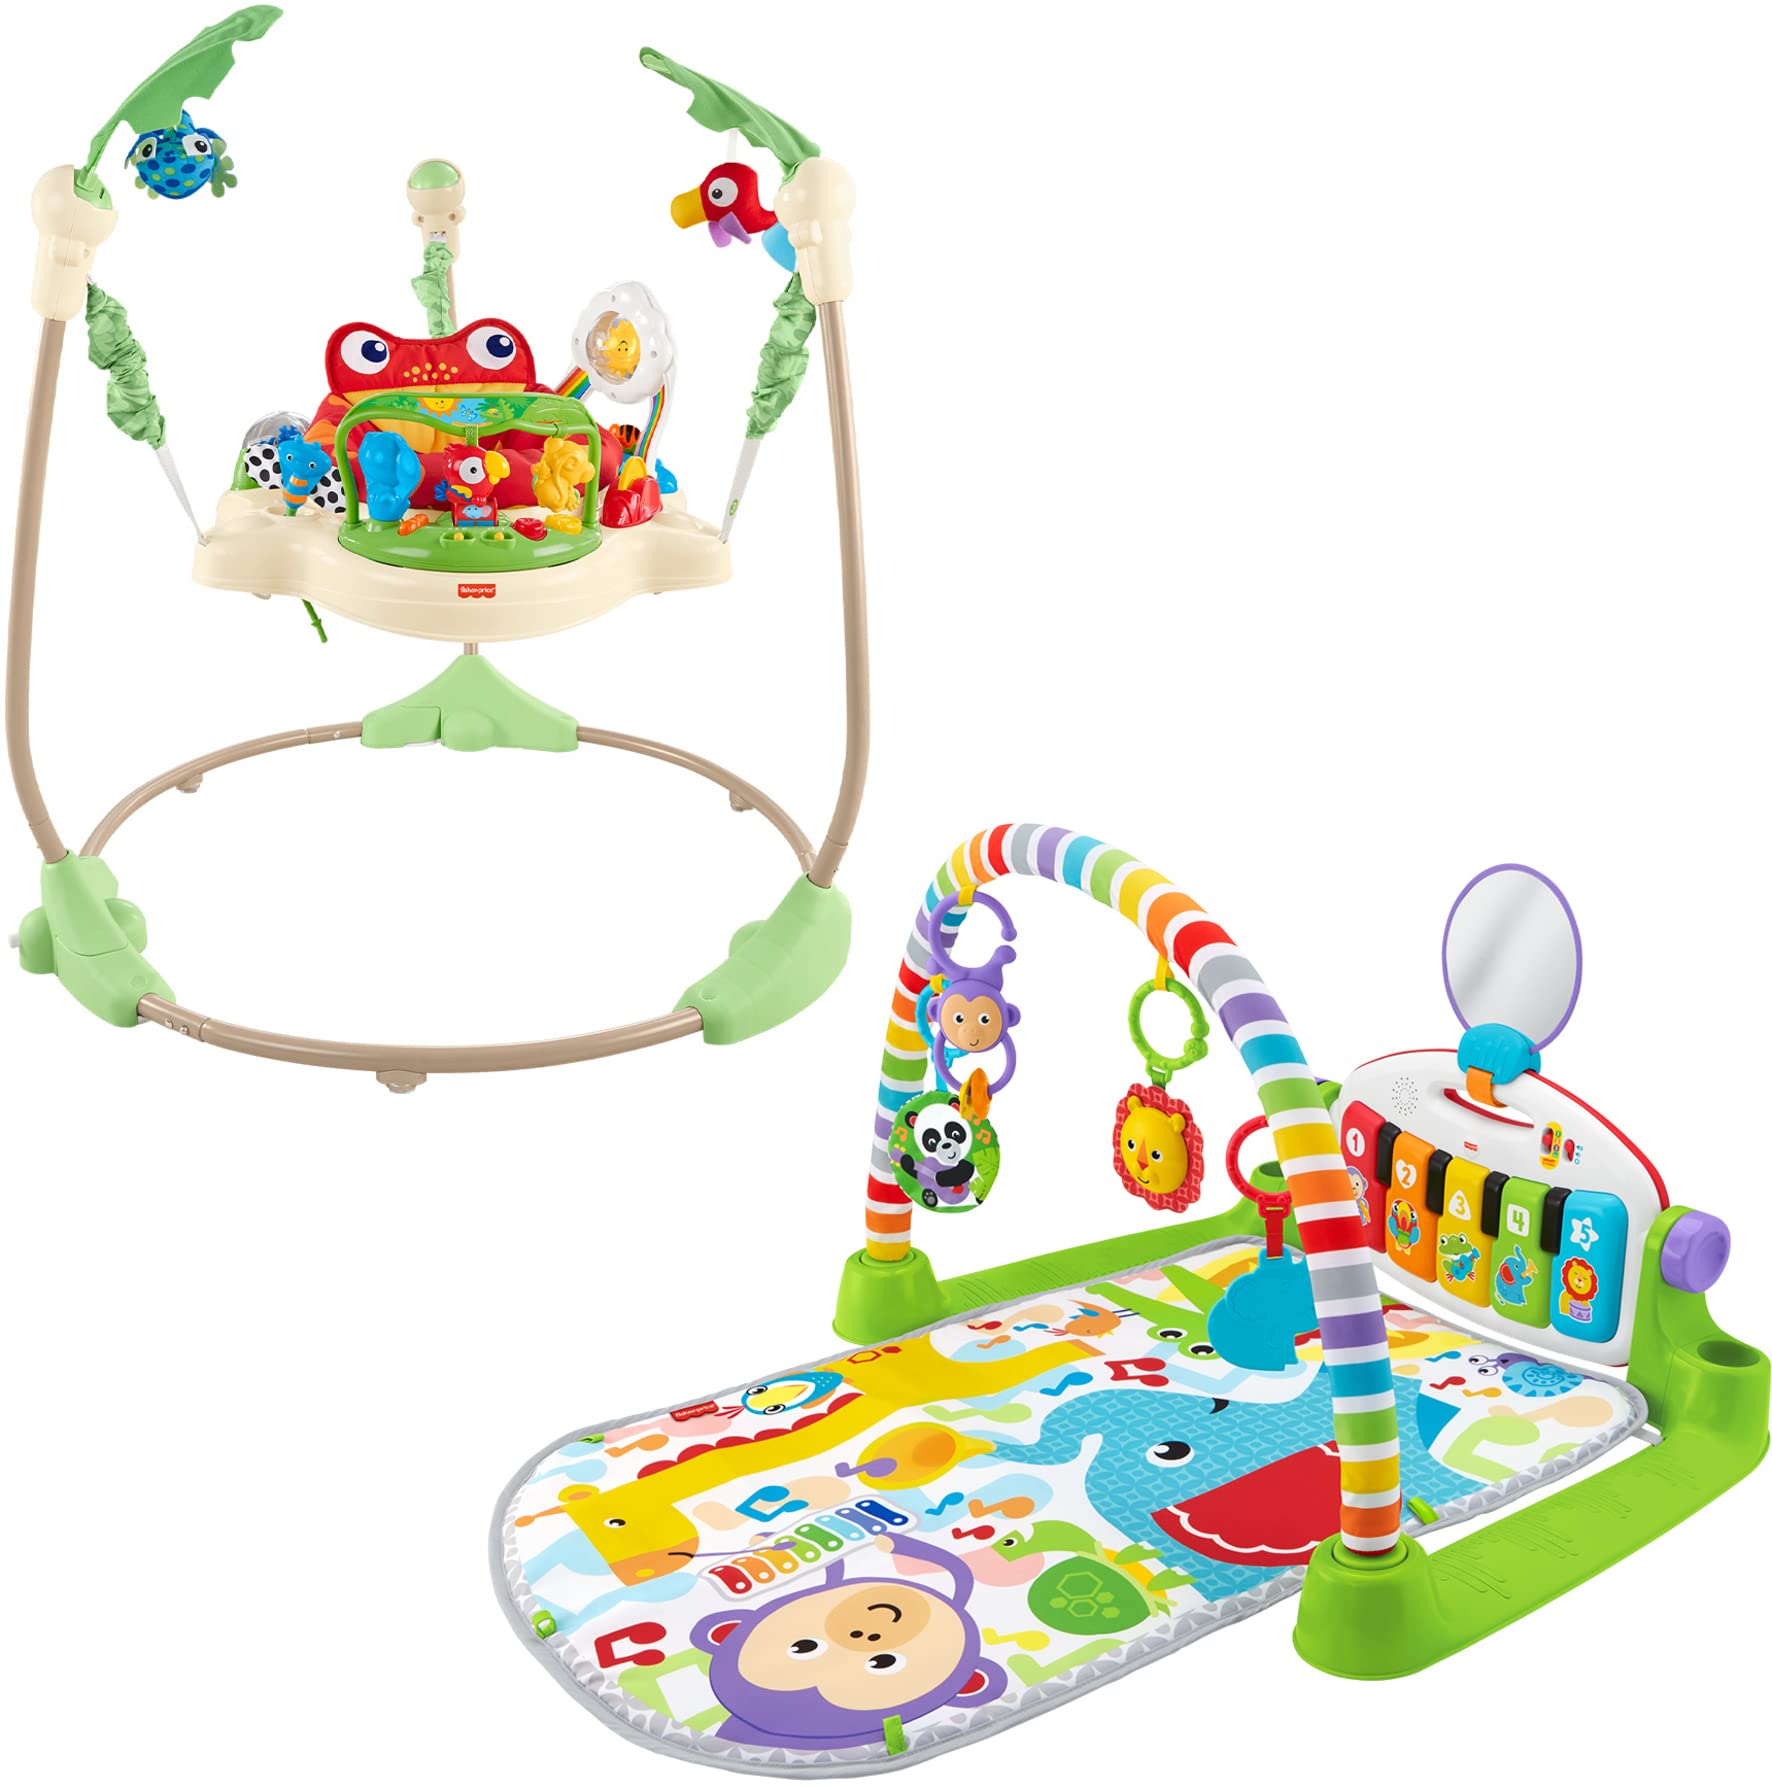 Fisher-Price Rainforest Jumperoo, freestanding Baby Activity Center with Lights, Music, and Toys Fisher-Price Deluxe Kick 'n Play Piano Gym, Green, Gender Neutral (Frustration Free Packaging)